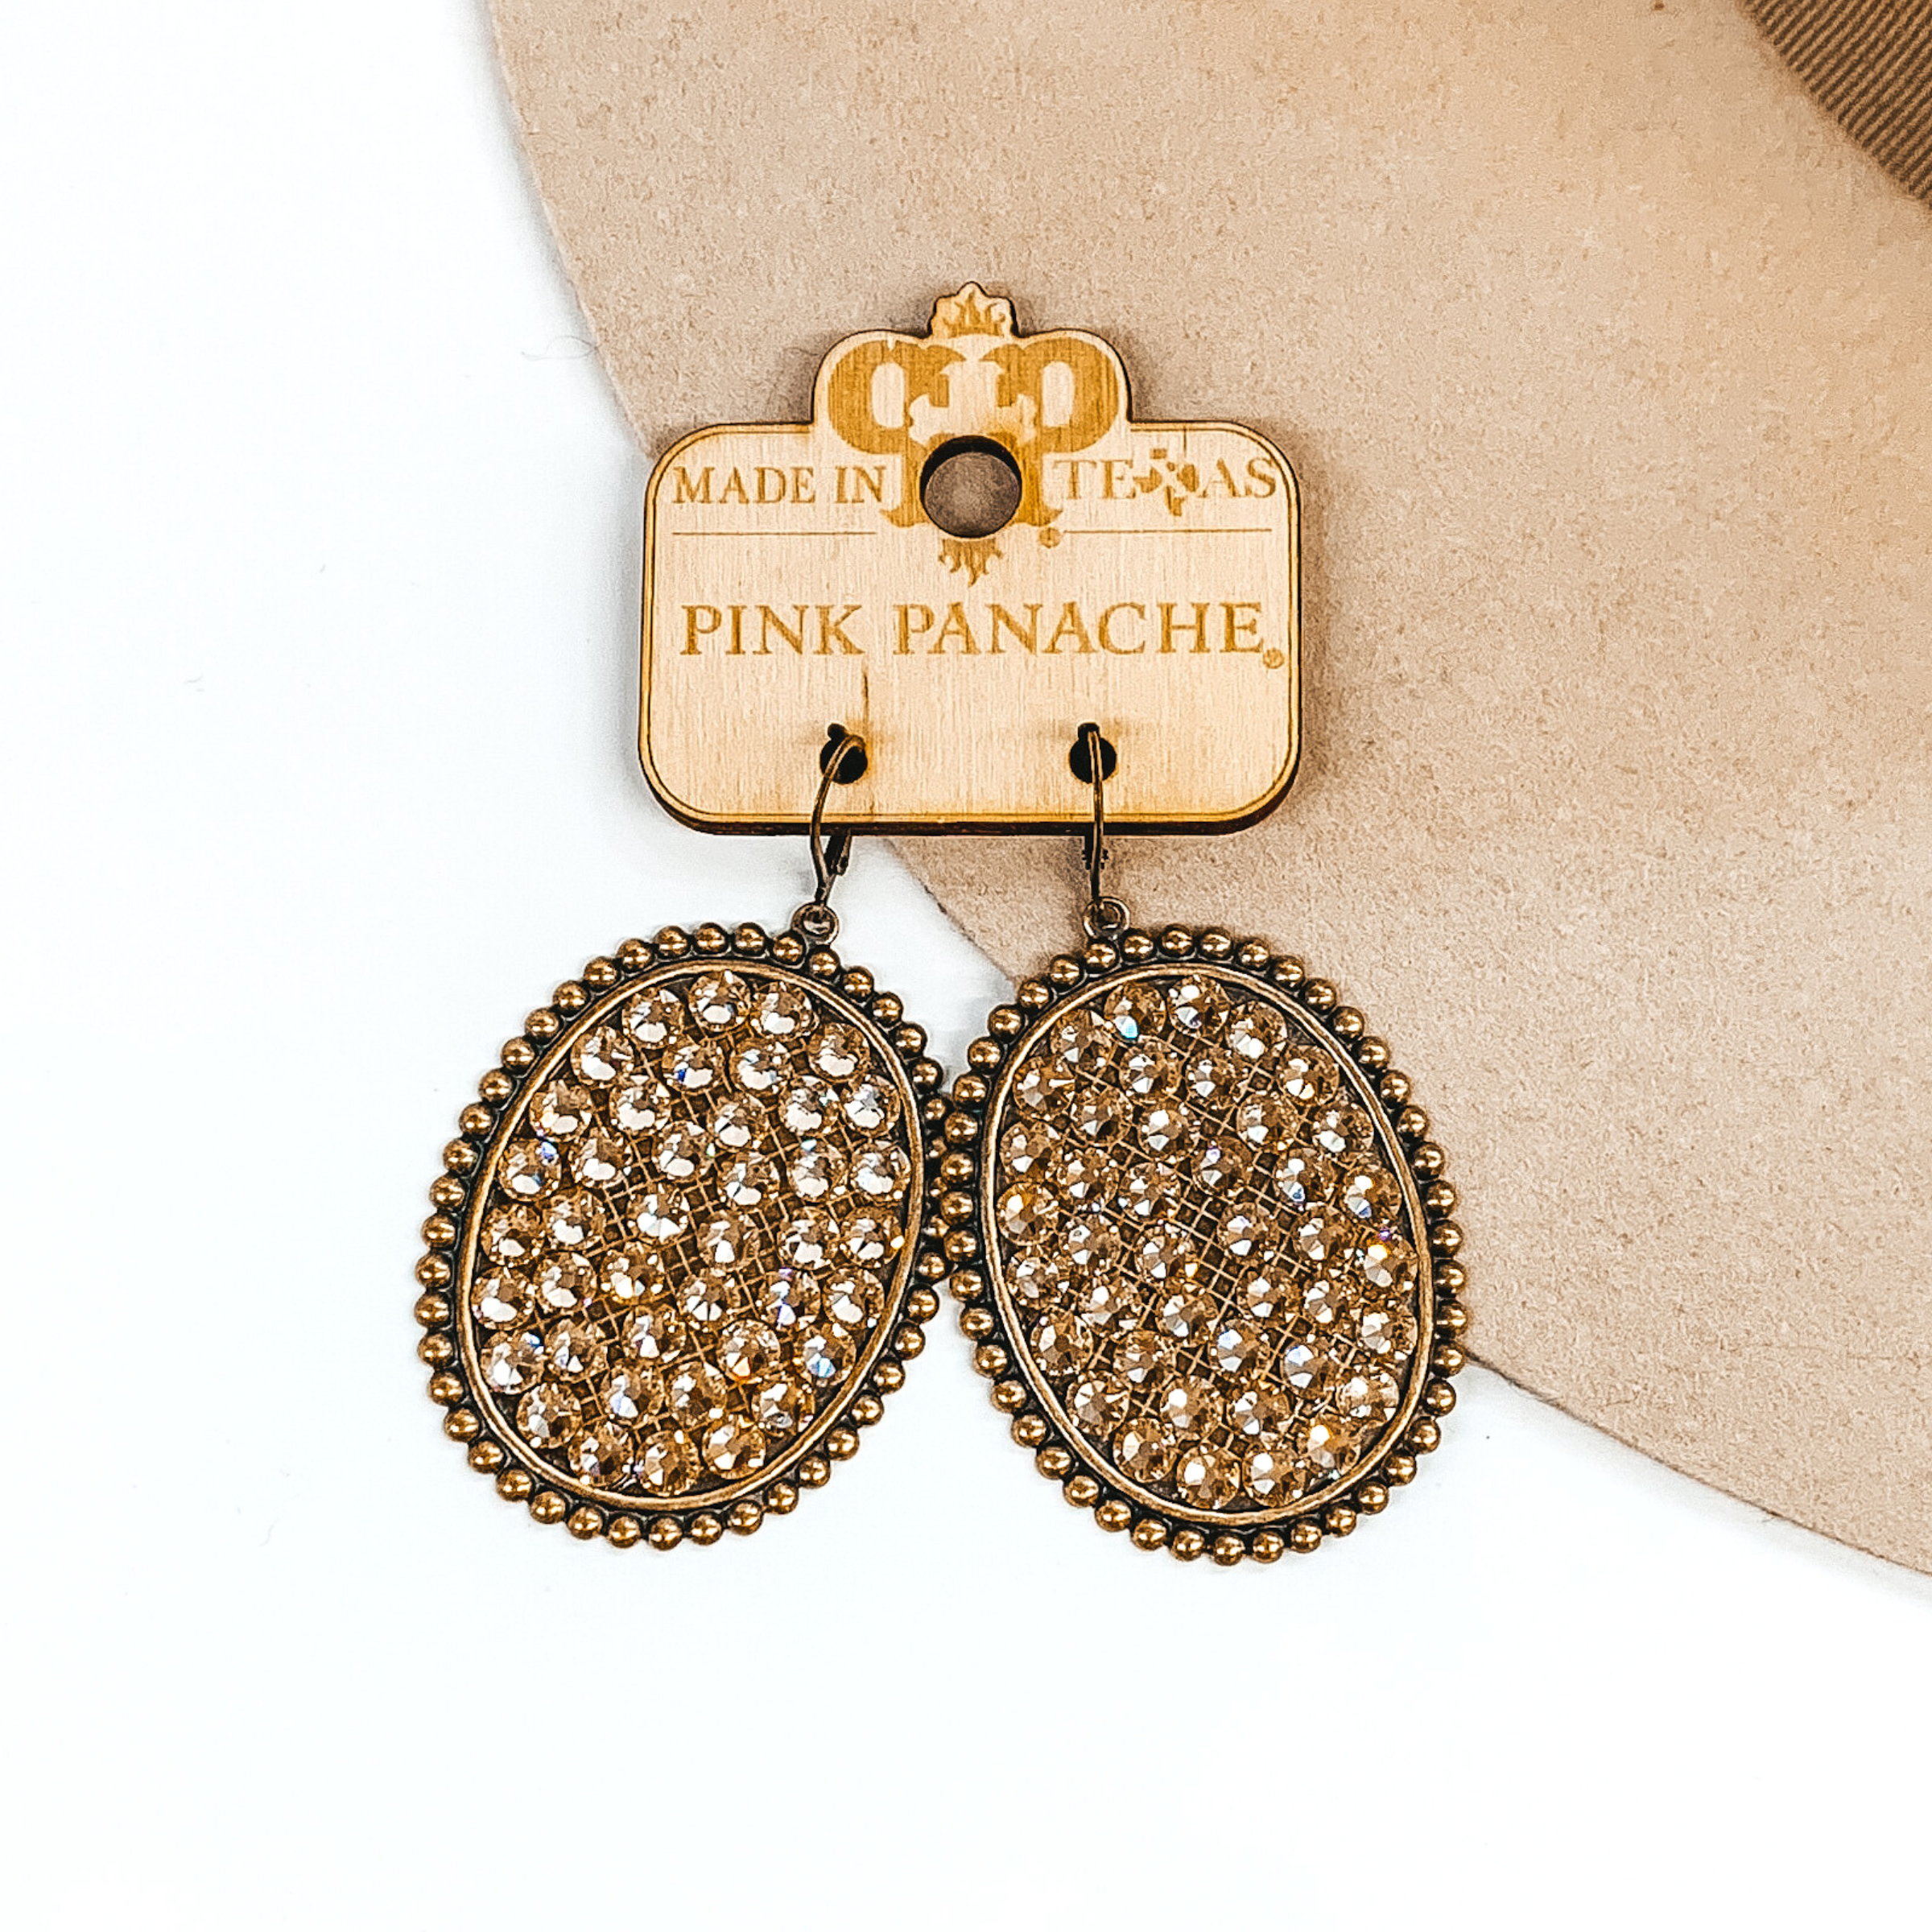 Large, bronze oval dangle earrings. The ovals are outline with bronze circles and has light topaz crystals on the inside of the ovals. These earrings are pictured on a wood earring holder and on a beige and white background.